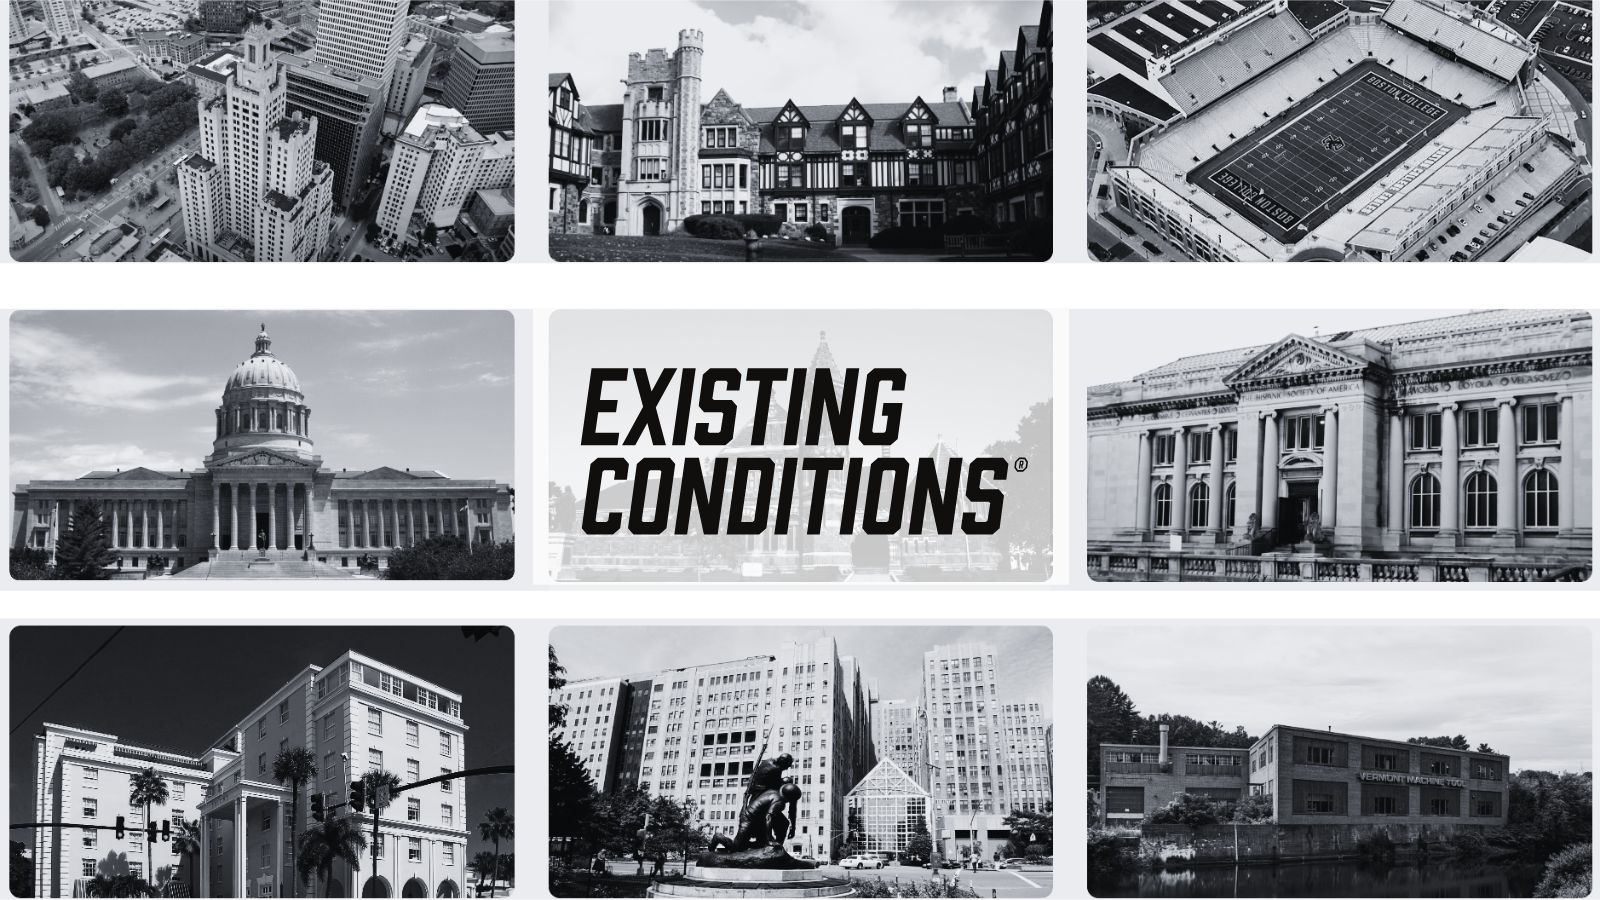 Existing Conditions’ History, Experience, and Portfolio